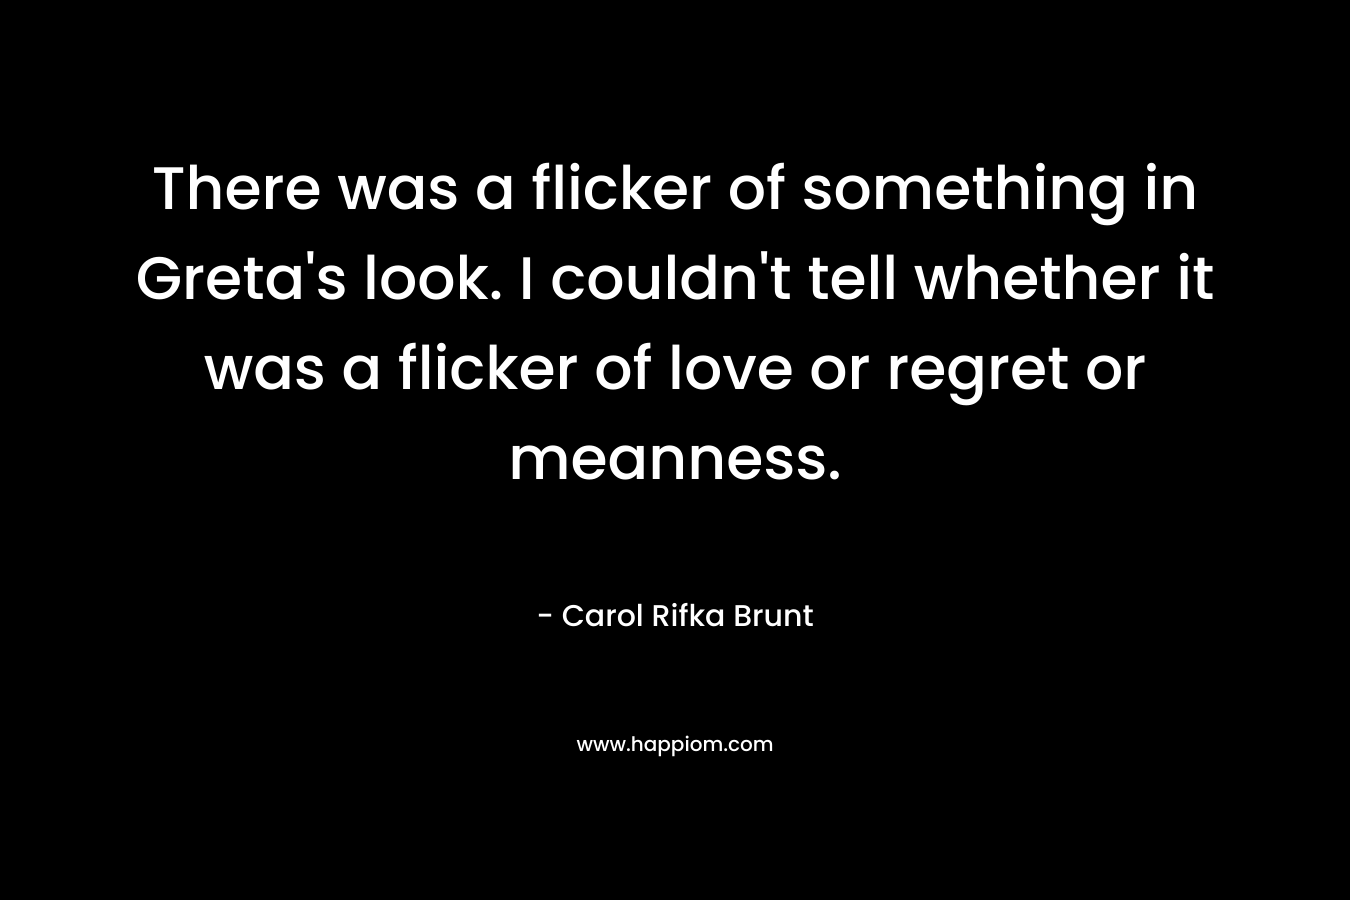 There was a flicker of something in Greta’s look. I couldn’t tell whether it was a flicker of love or regret or meanness. – Carol Rifka Brunt